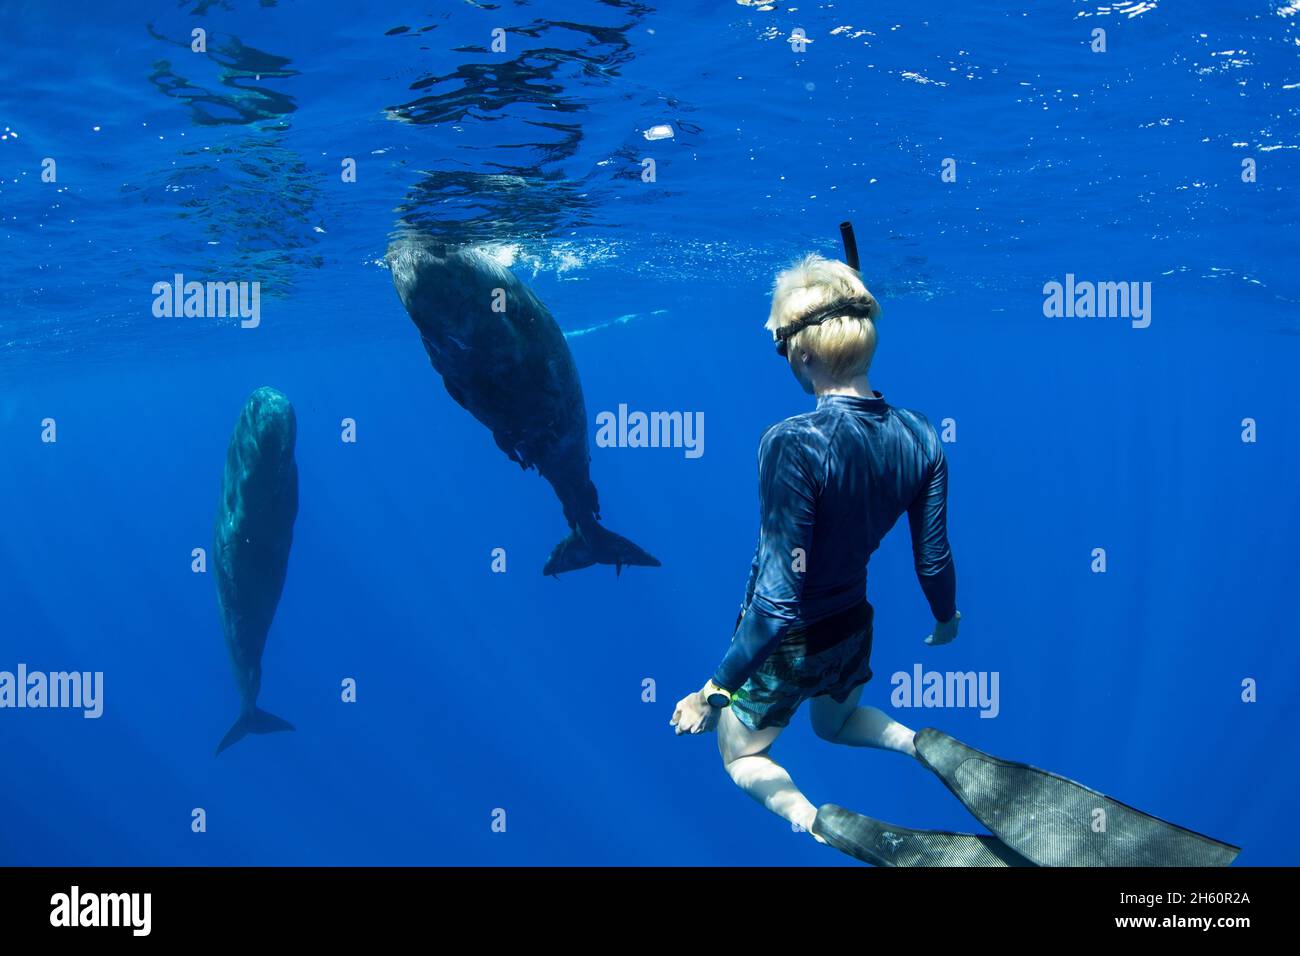 A whale pod in the Indian Ocean. INDIAN OCEAN: A BEAUTIFUL image has captured a woman swimming with a sperm whale in the Indian Ocean. In the image, a Stock Photo